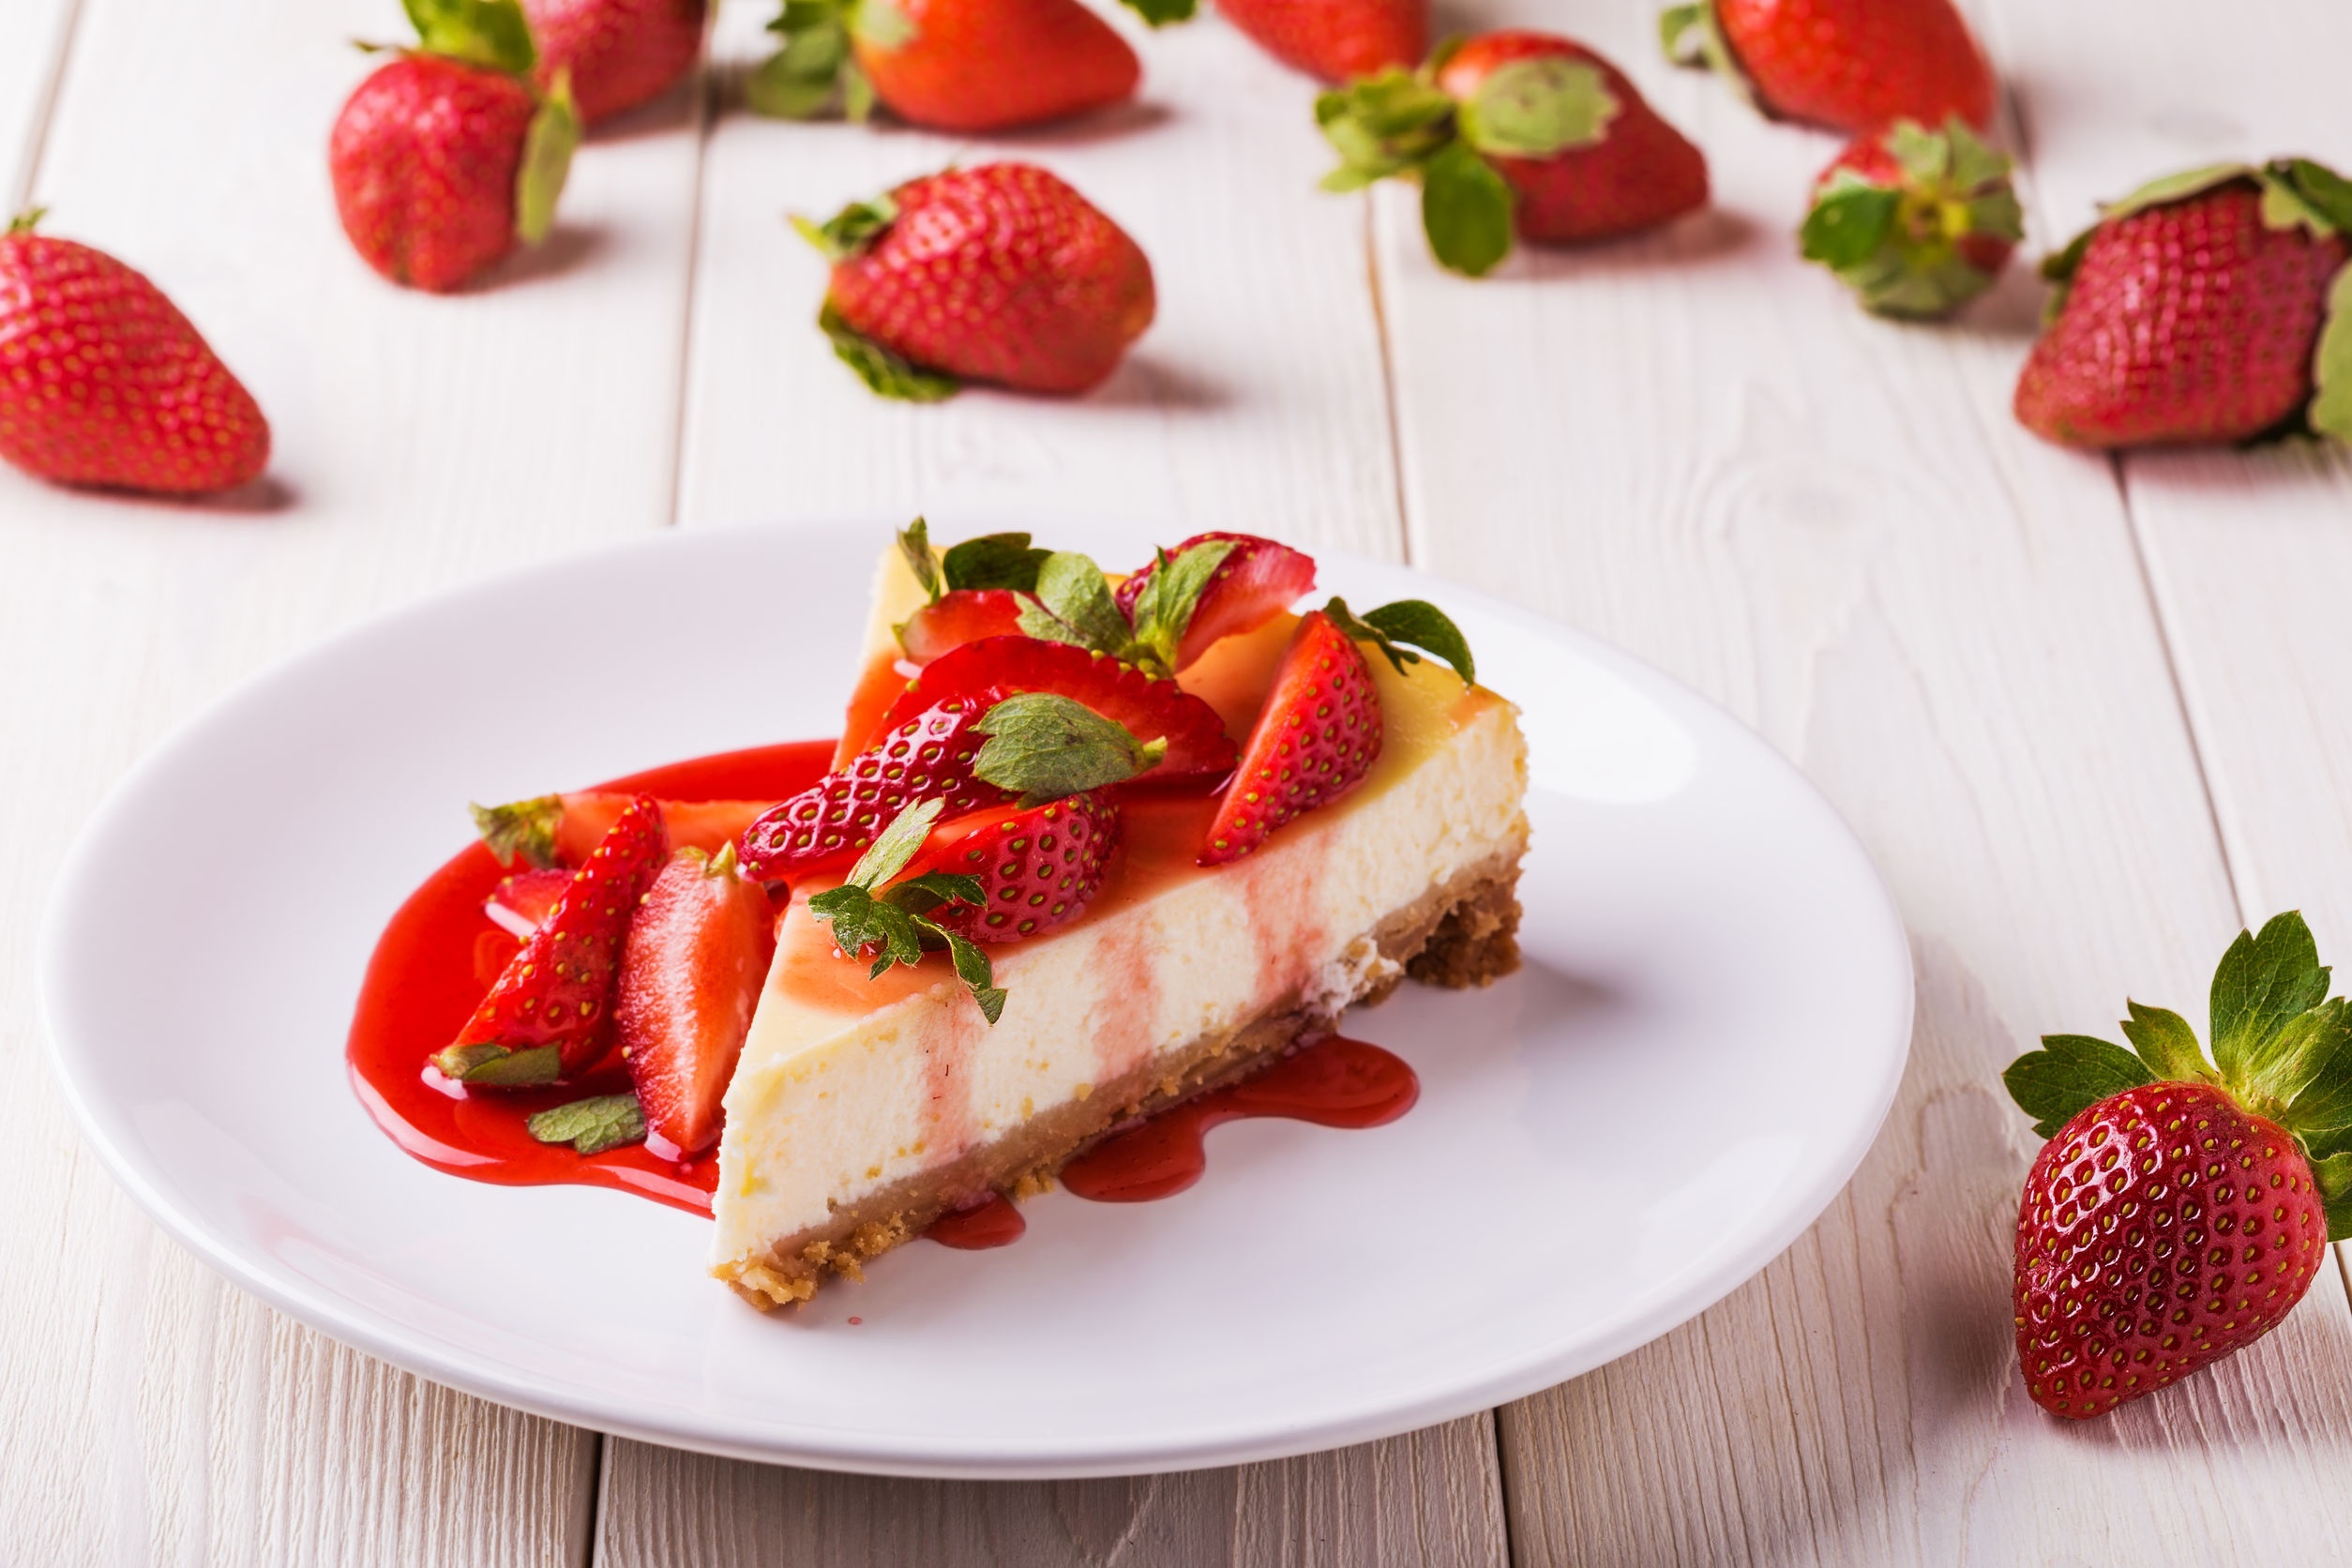 Cheesecake: A thick, creamy filling of cheese, eggs, and sugar over a thinner crust. 2510x1680 HD Wallpaper.